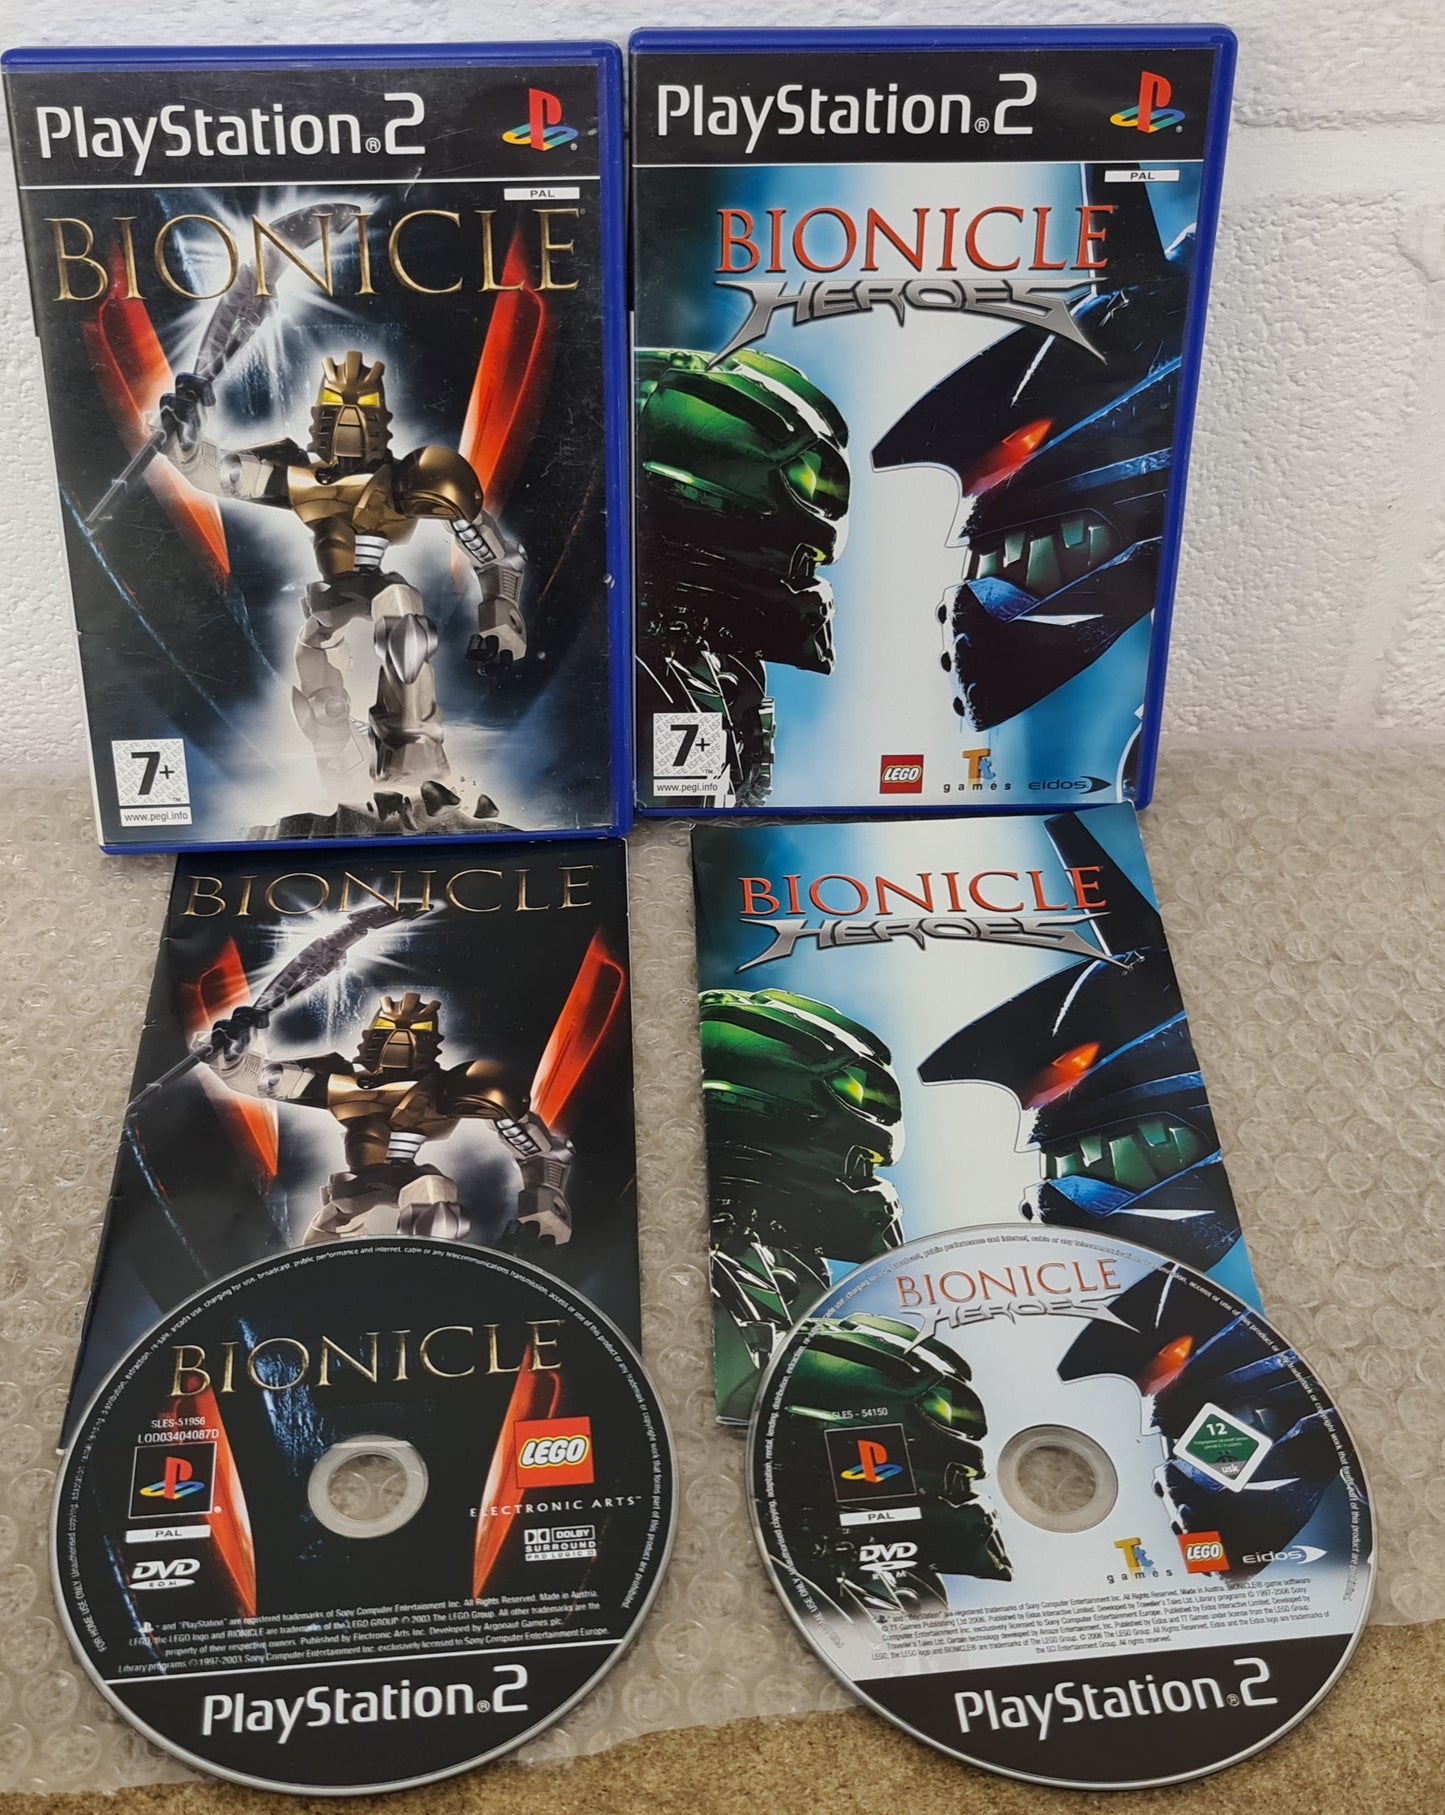 Bionicle & Bionicle Heroes Sony Playstation 2 (PS2) Game